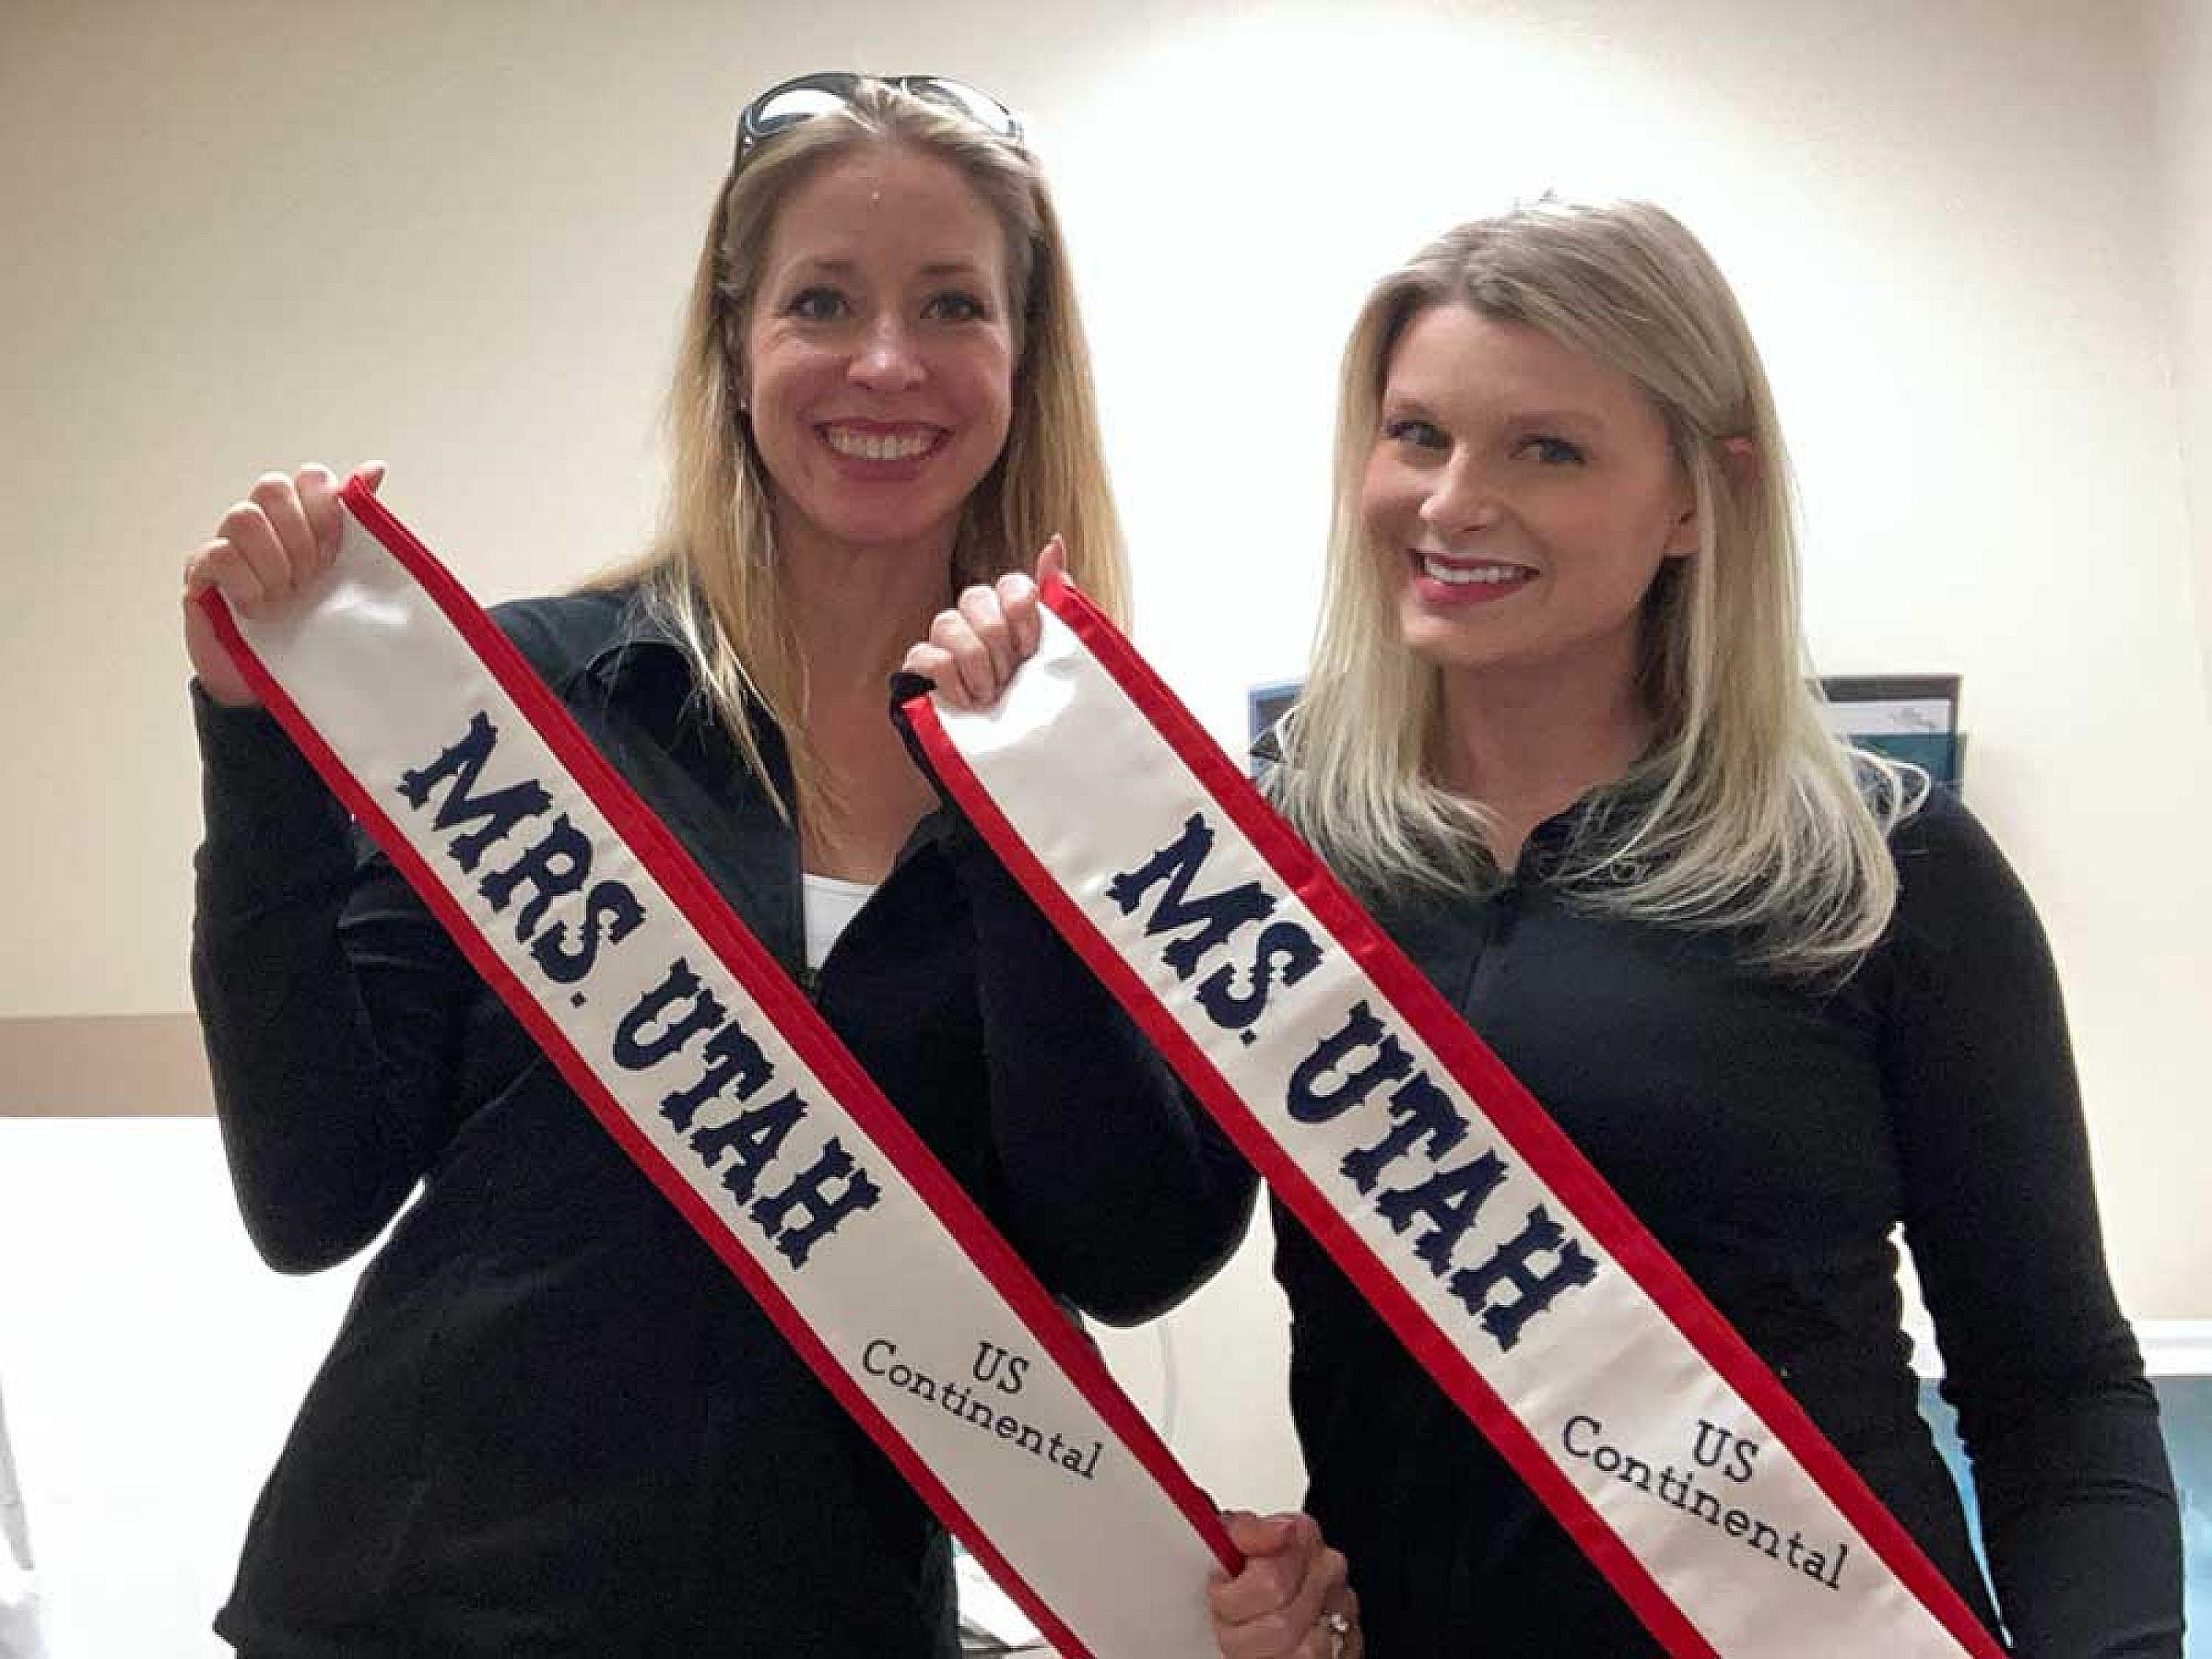 Stephanie Griffin and Kelli McDonald together with Mrs and Ms Utah Sashes